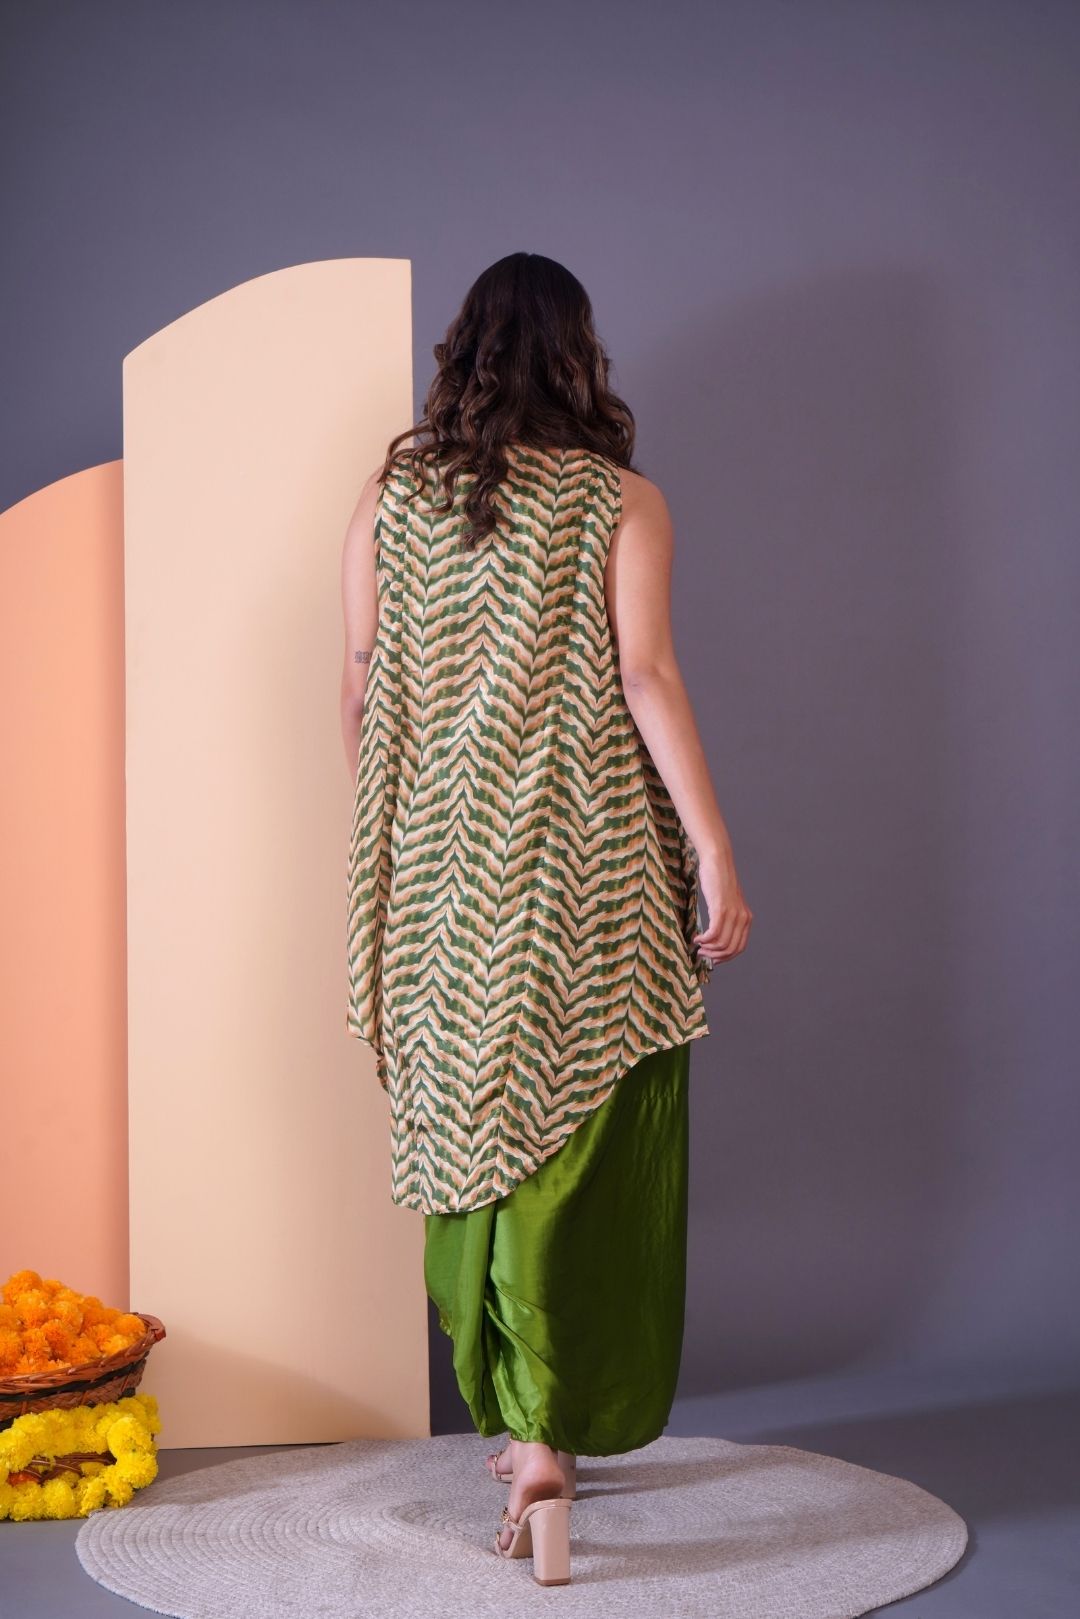 Green Embroidered Dhoti Style Skirt With Top And Short Shrug